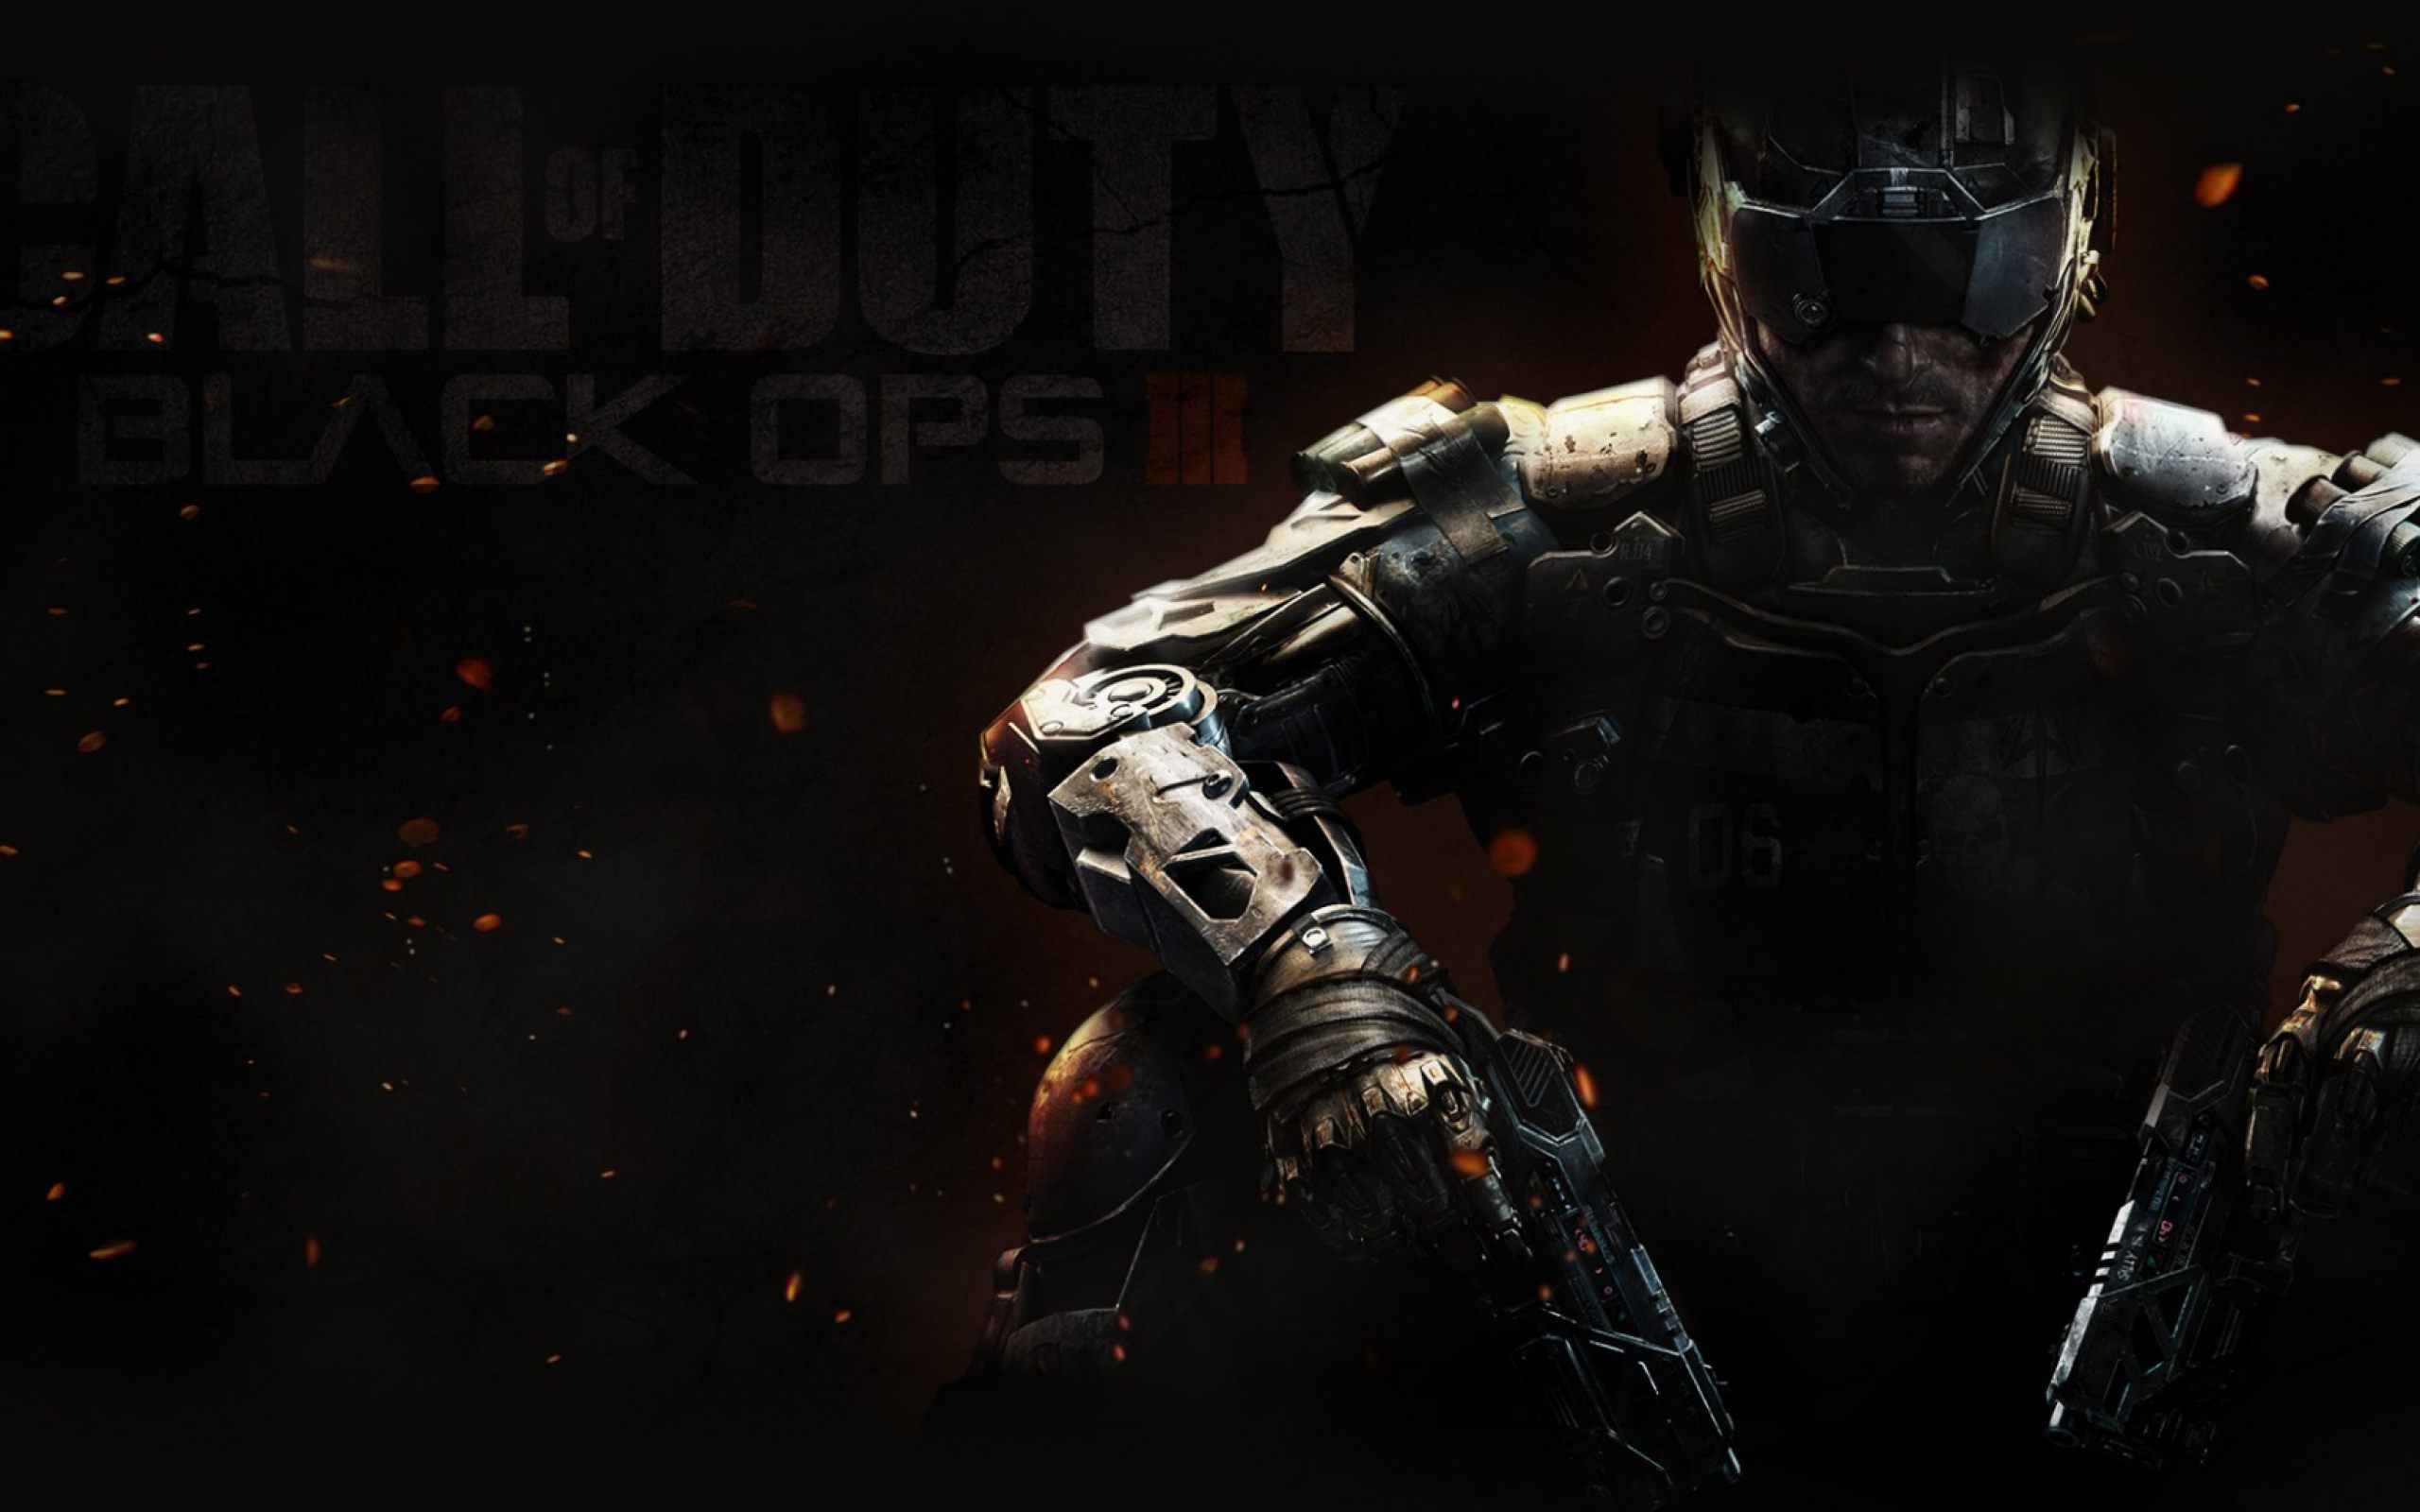 Call Of Duty Black Ops 3 Wallpaper Download High Quality 2560x1600